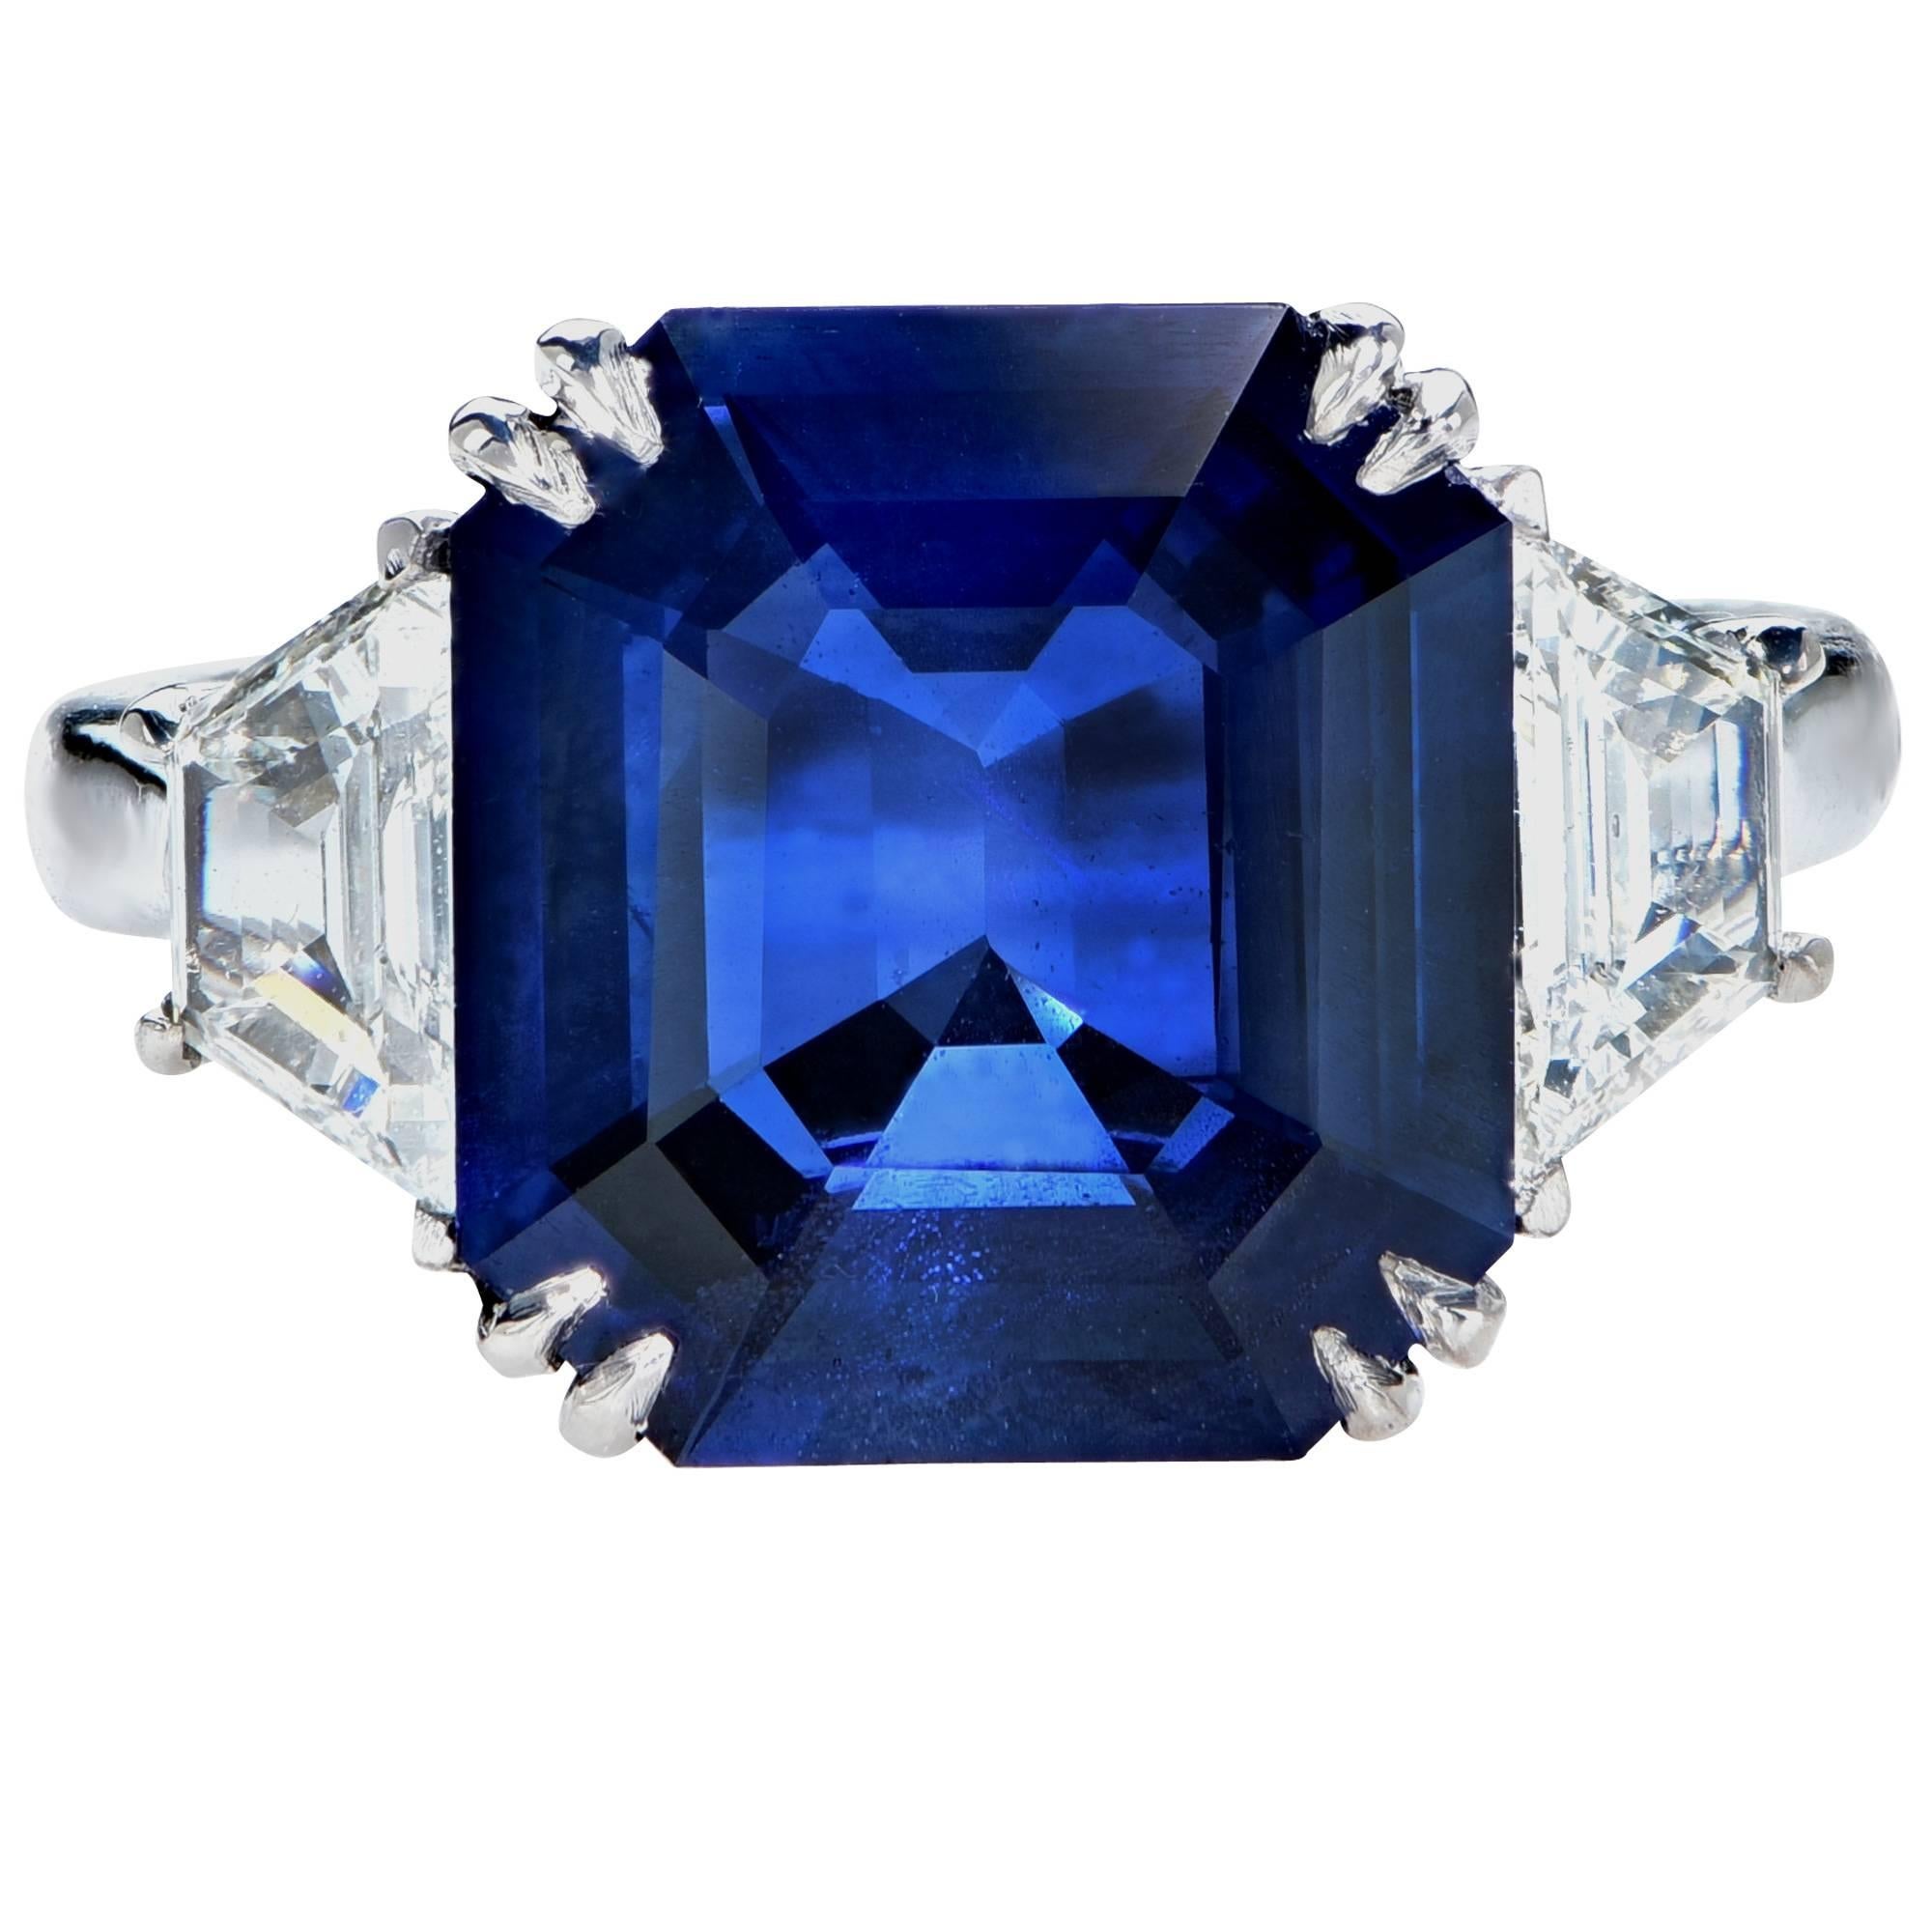 This beautiful custom-made platinum ring features an 8.24ct unheated Madagascar sapphire accented by 2 step-cut trapezoid cut diamonds weighing approximately 1.60cts total, G color, VS clarity.

Ring size: 6.5
Metal weight: 9.48 grams

This